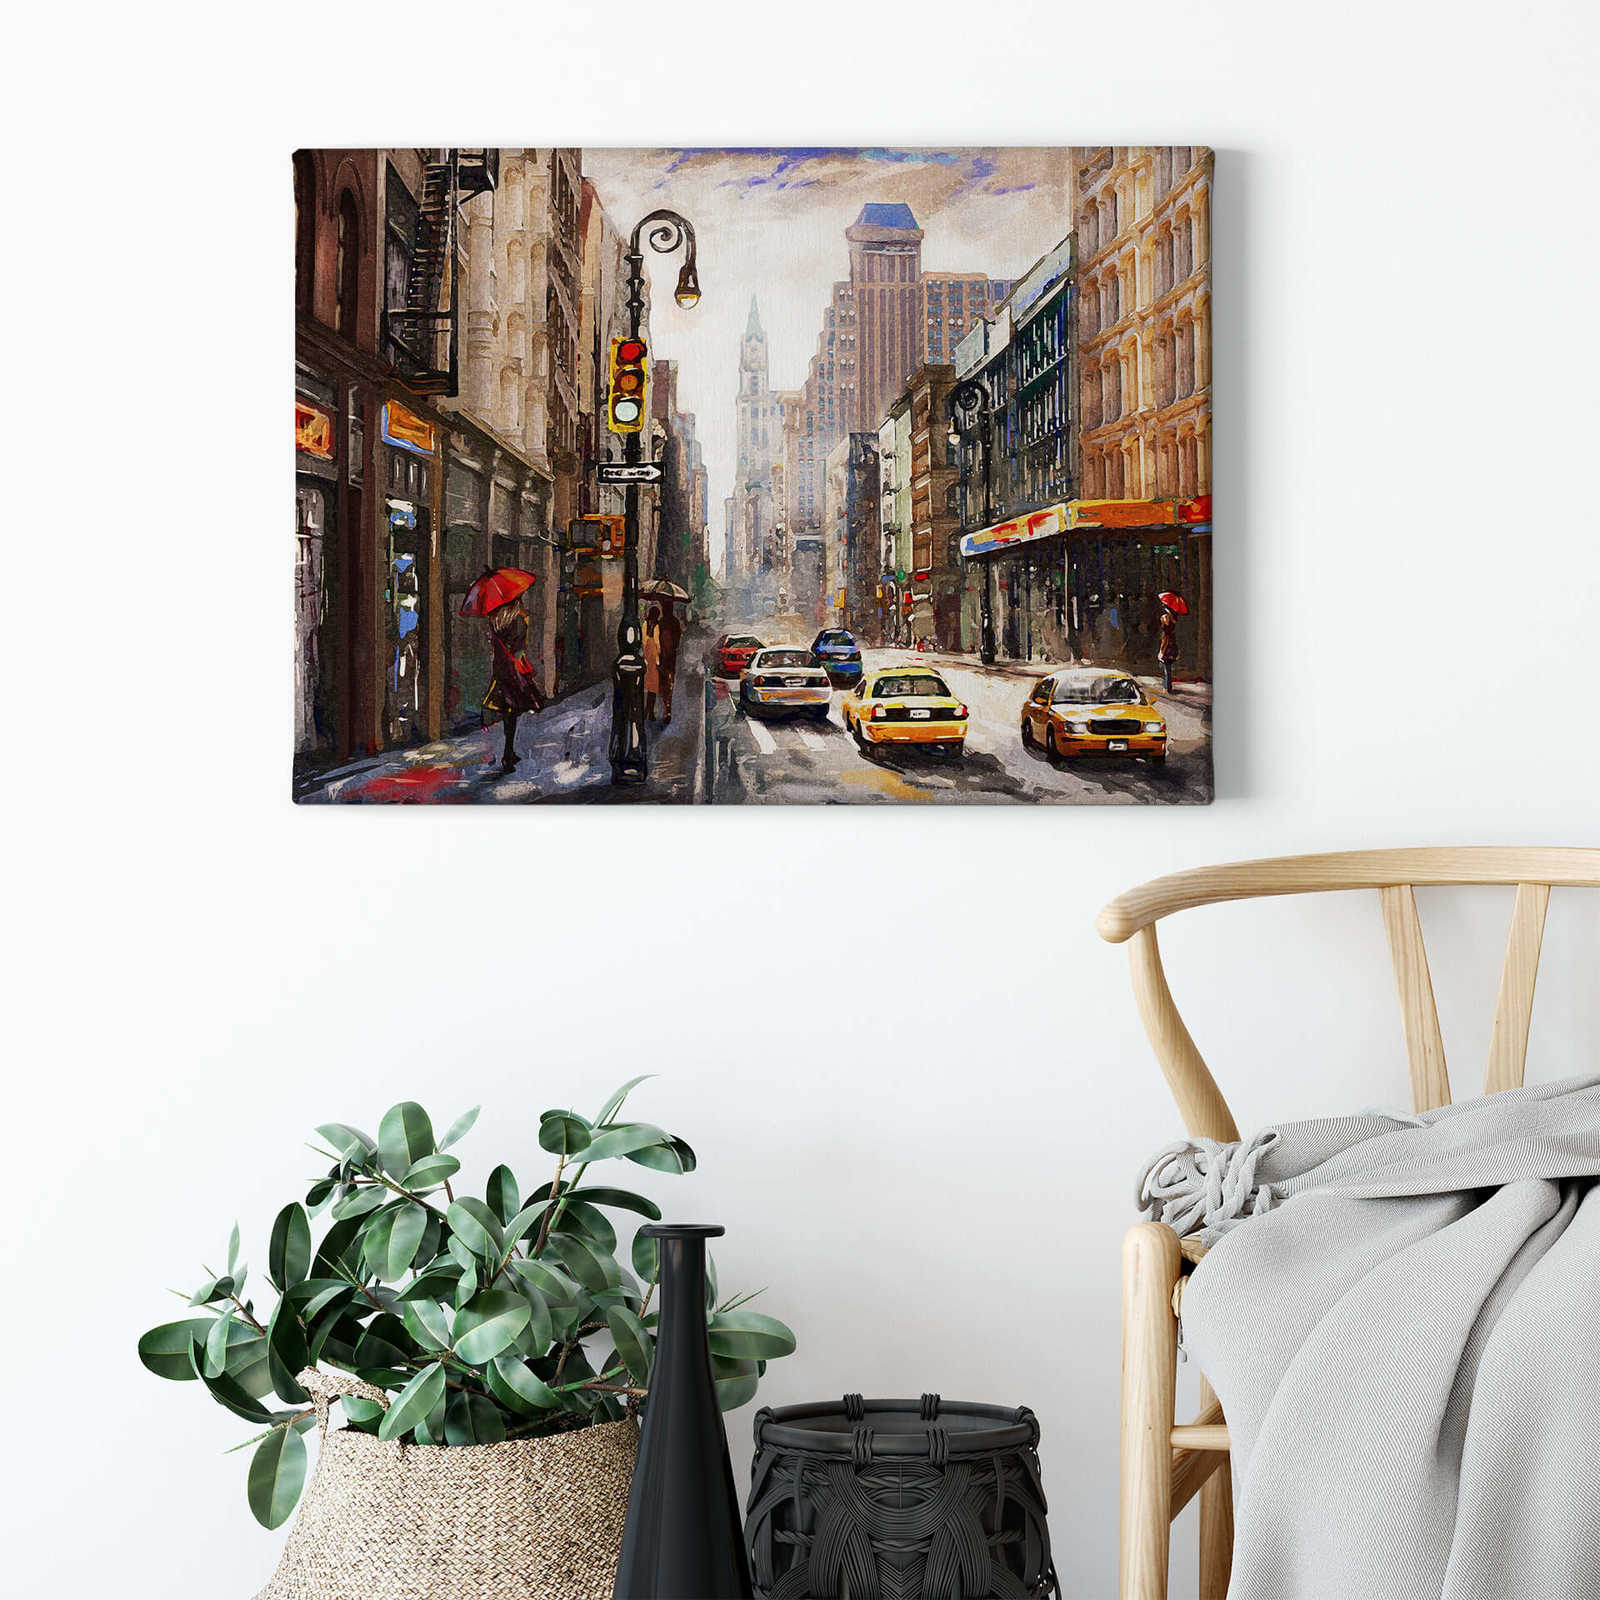             Canvas print New York City, painting style
        